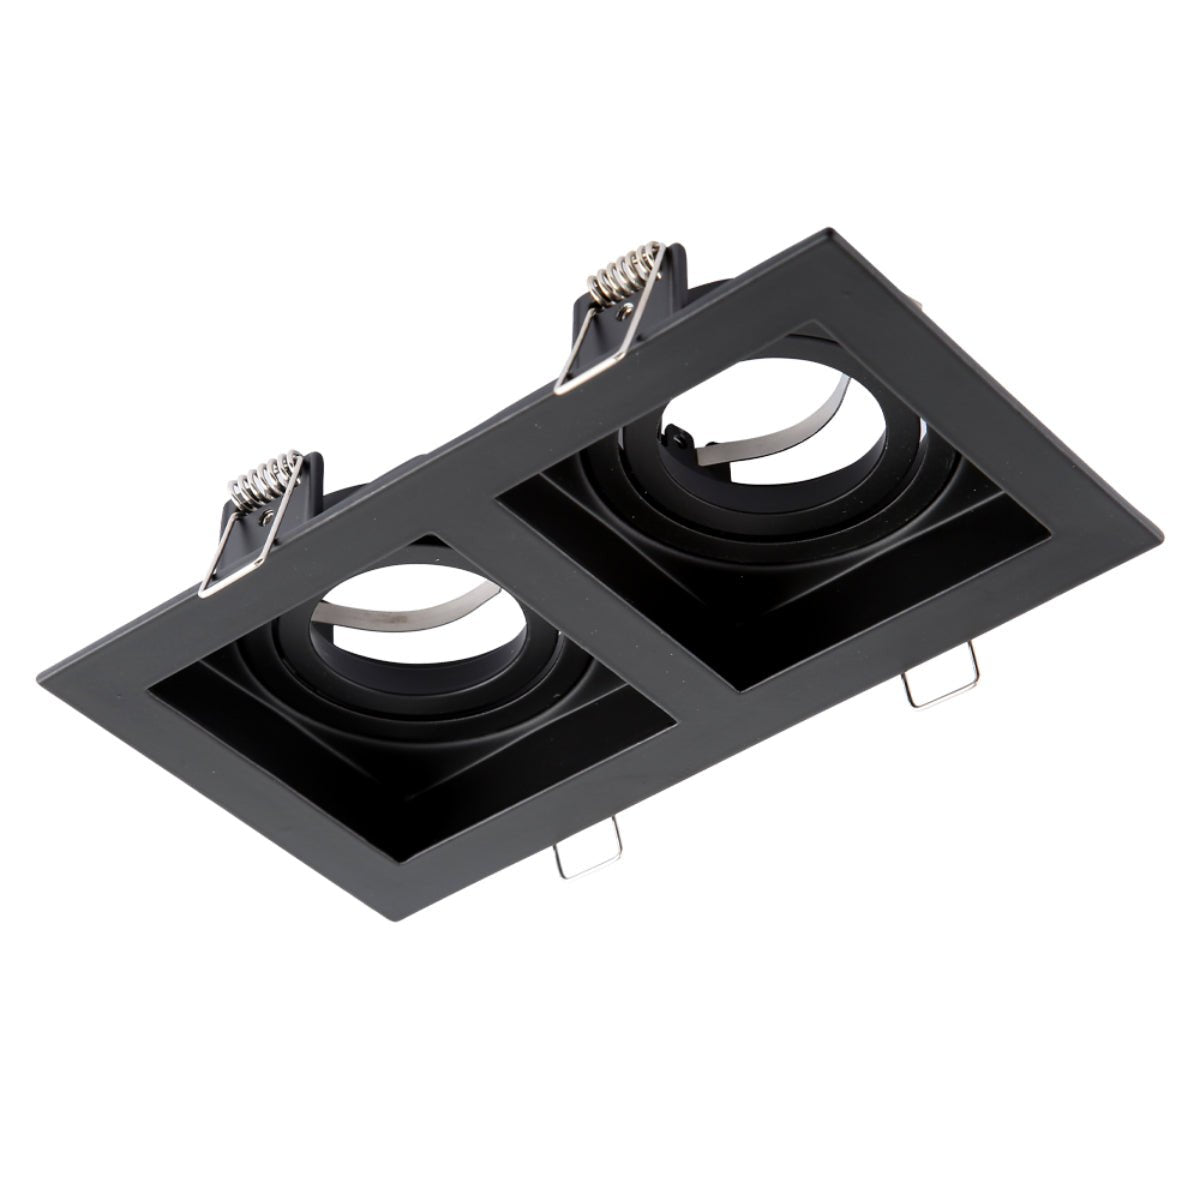 Main image of Grille Recessed Tilt Downlight Black with 2xGU10 Fitting | TEKLED 165-03880